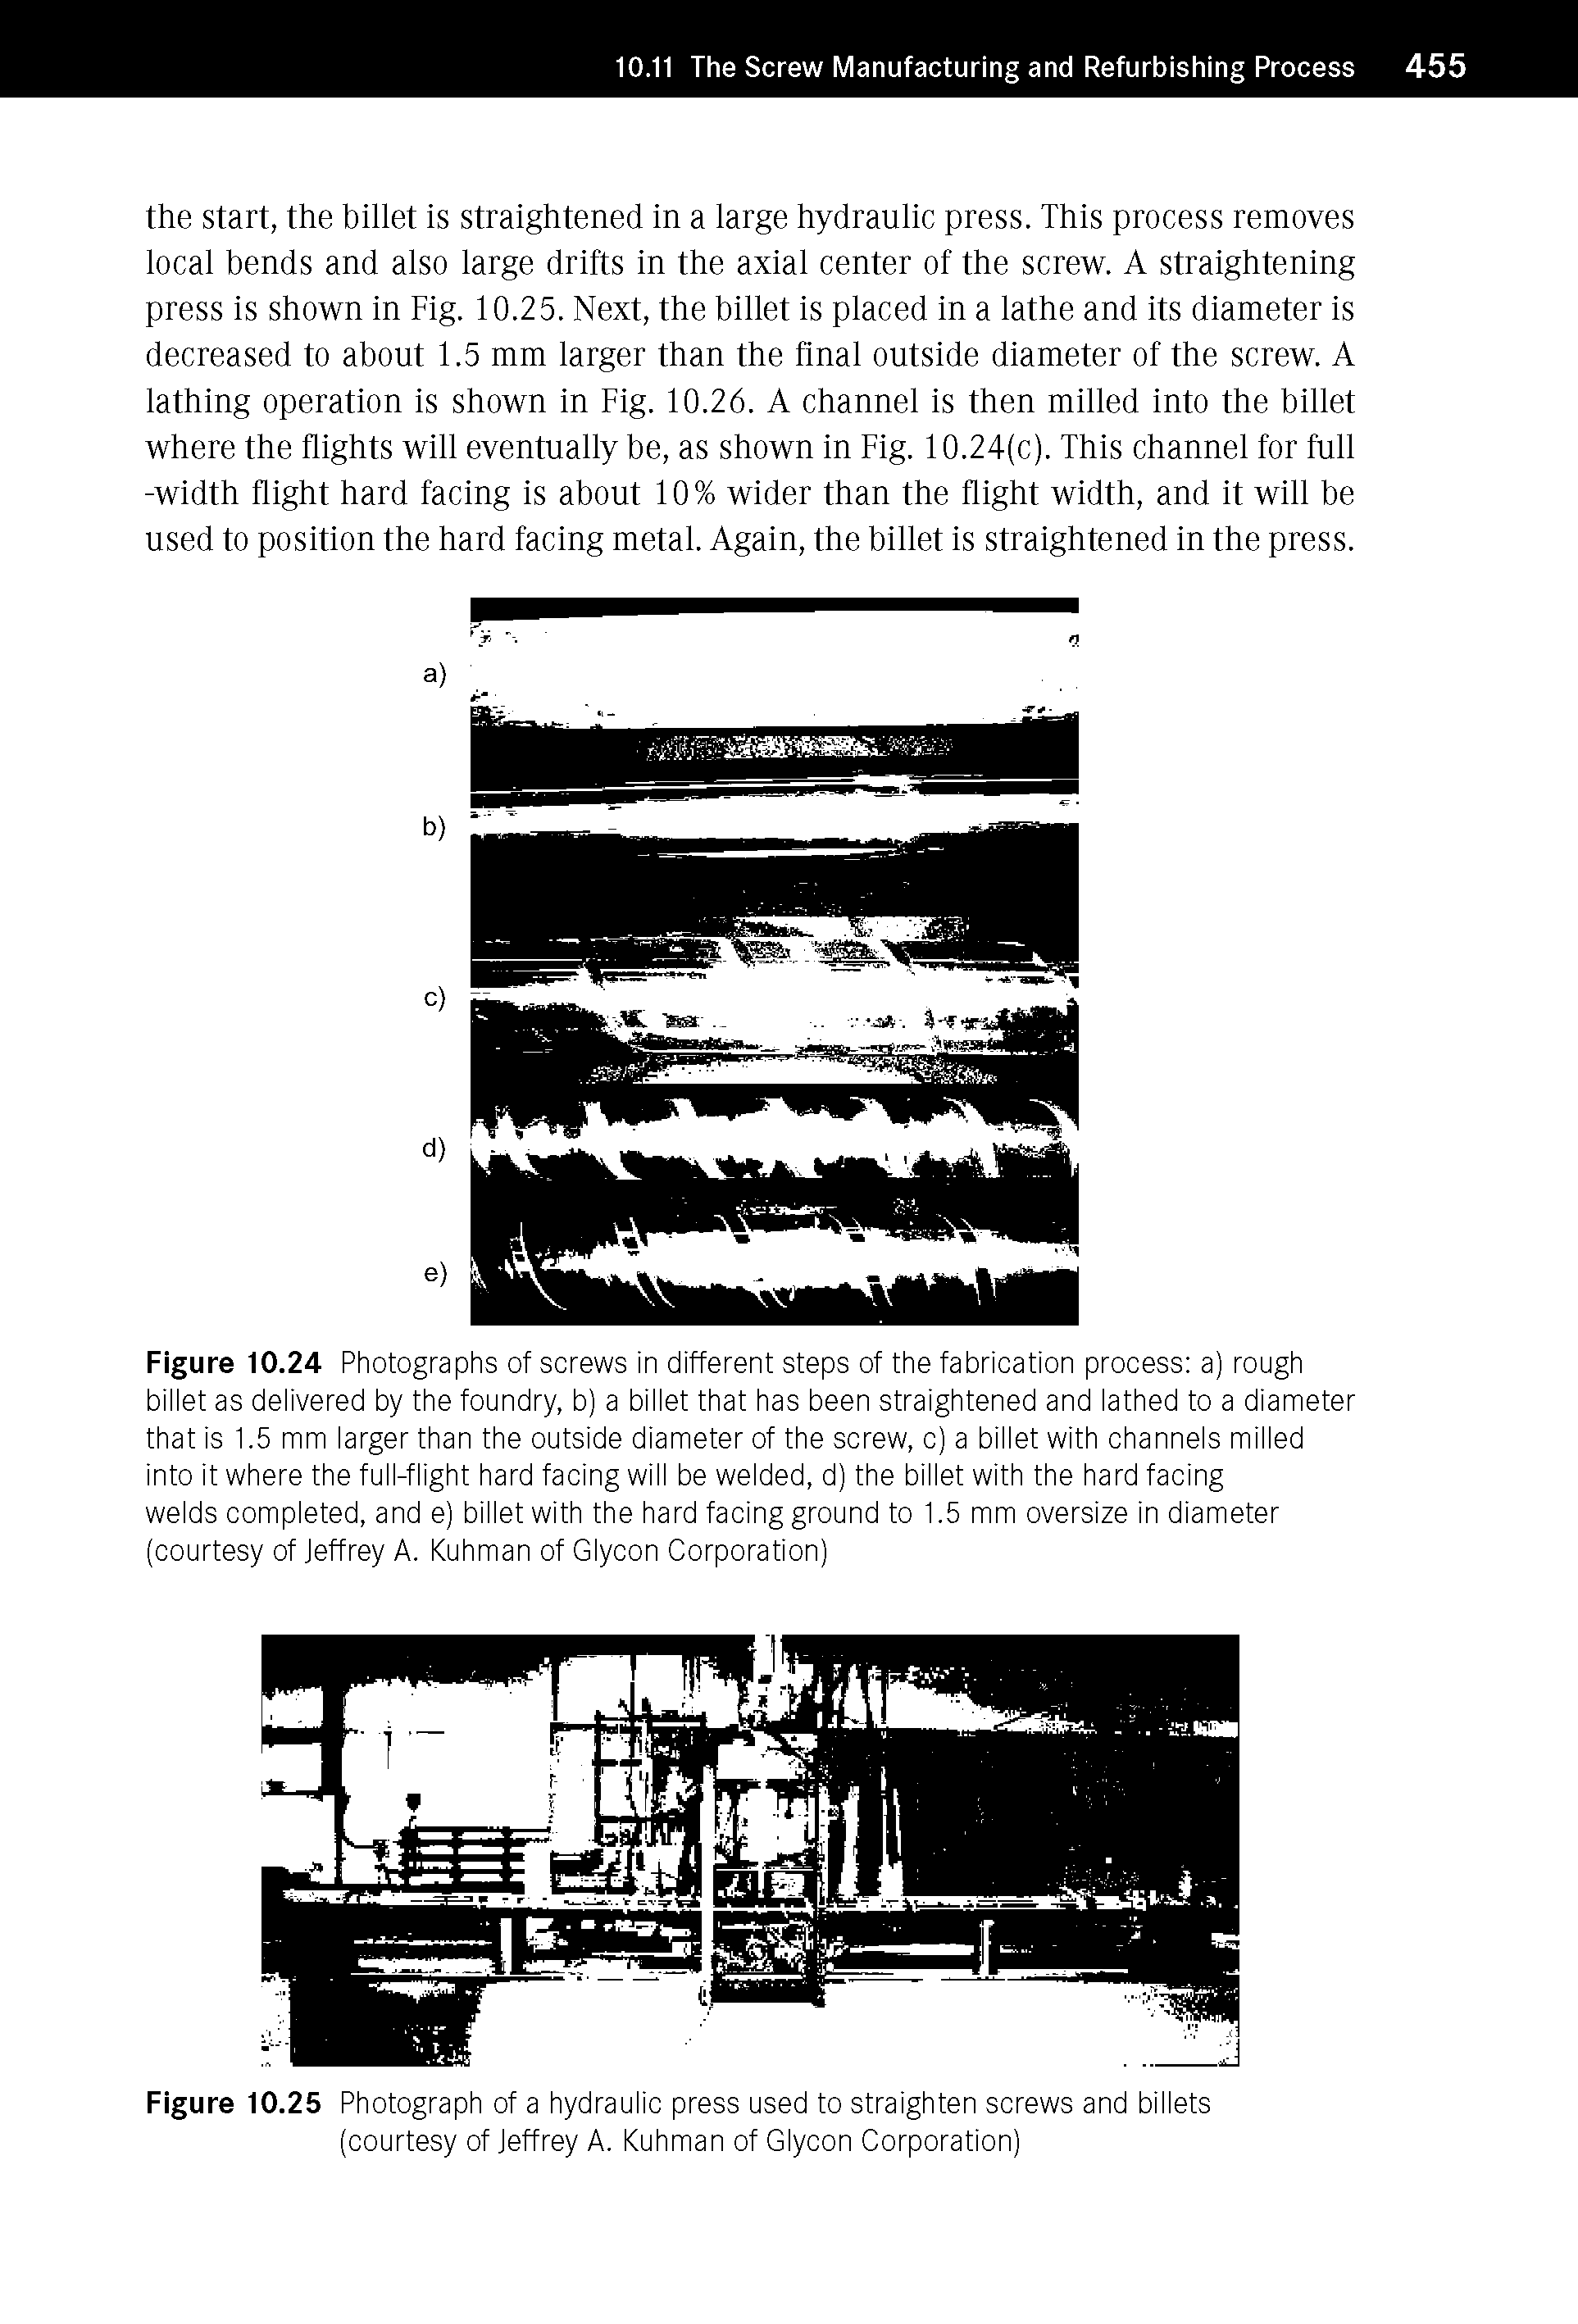 Figure 10.25 Photograph of a hydraulic press used to straighten screws and billets (courtesy of Jeffrey A. Kuhman of Glycon Corporation)...